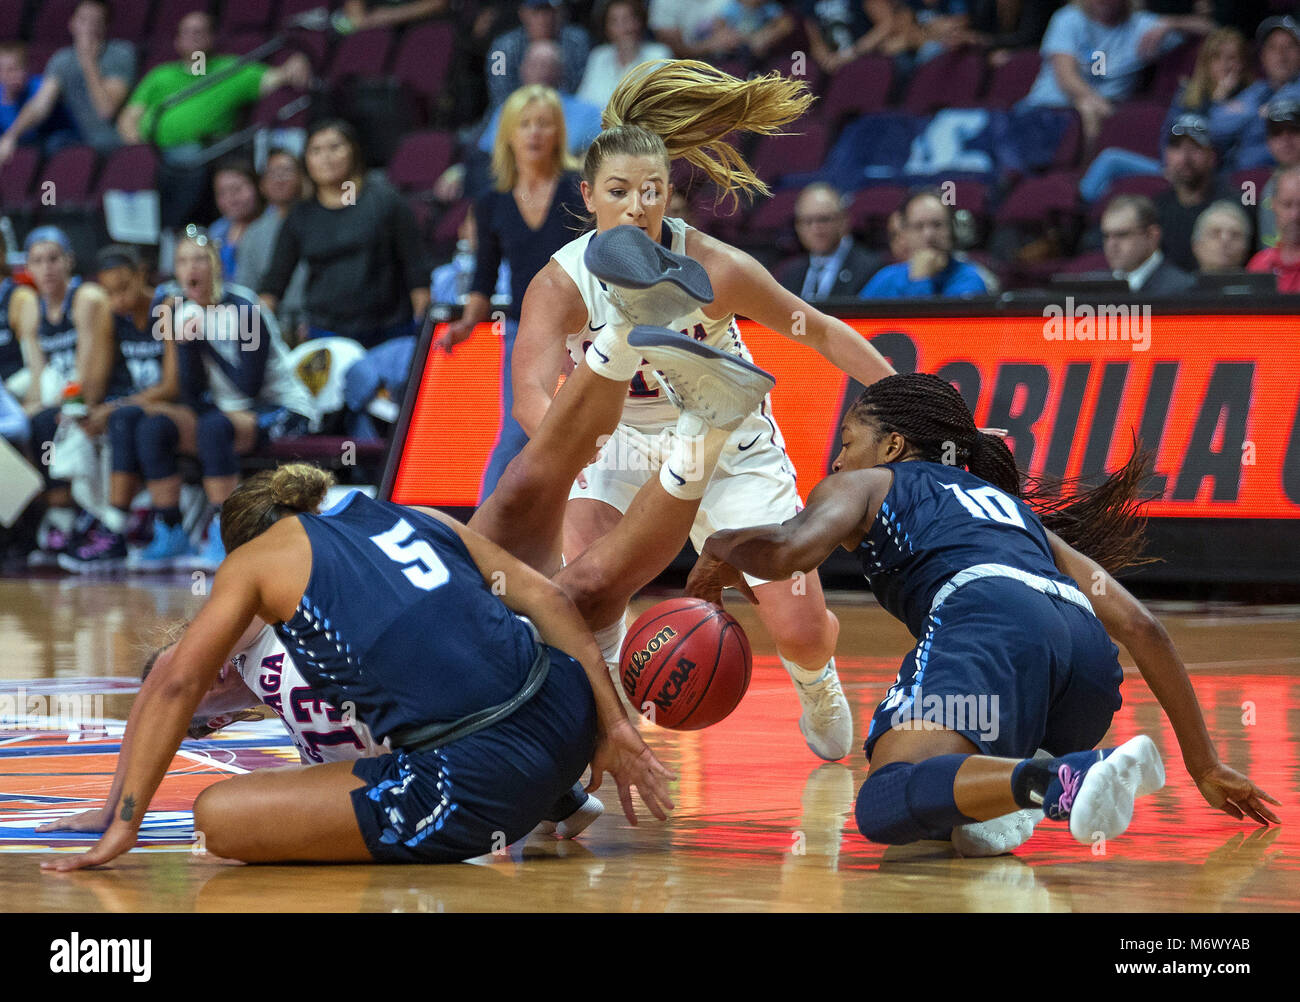 Las Vegas, Nevada, USA. 31st Jan, 2018. Gonzaga Bulldogs forward Jill Barta (13) tumbles after a loose ball between San Diego Toreros guard Aubrey Ward-El (5) and guard Myah Pace (10) during the final period of an NCAA college basketball game in the women's finals of the West Coast Conference tournament, Tuesday, March 6, 2018, in Las Vegas.Photo by L.E. Baskow Credit: L.E. Baskow/ZUMA Wire/Alamy Live News Stock Photo